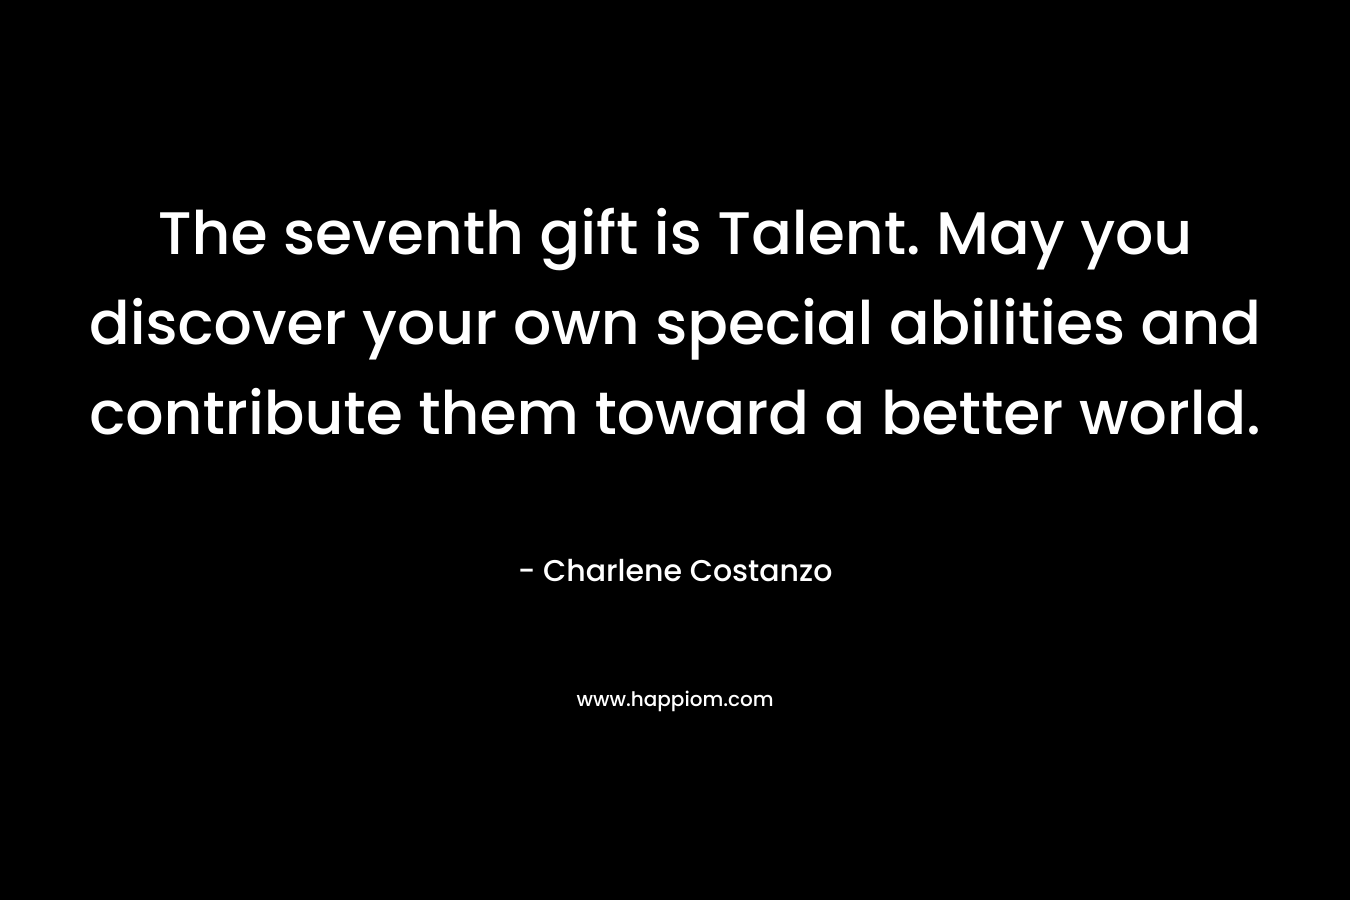 The seventh gift is Talent. May you discover your own special abilities and contribute them toward a better world.